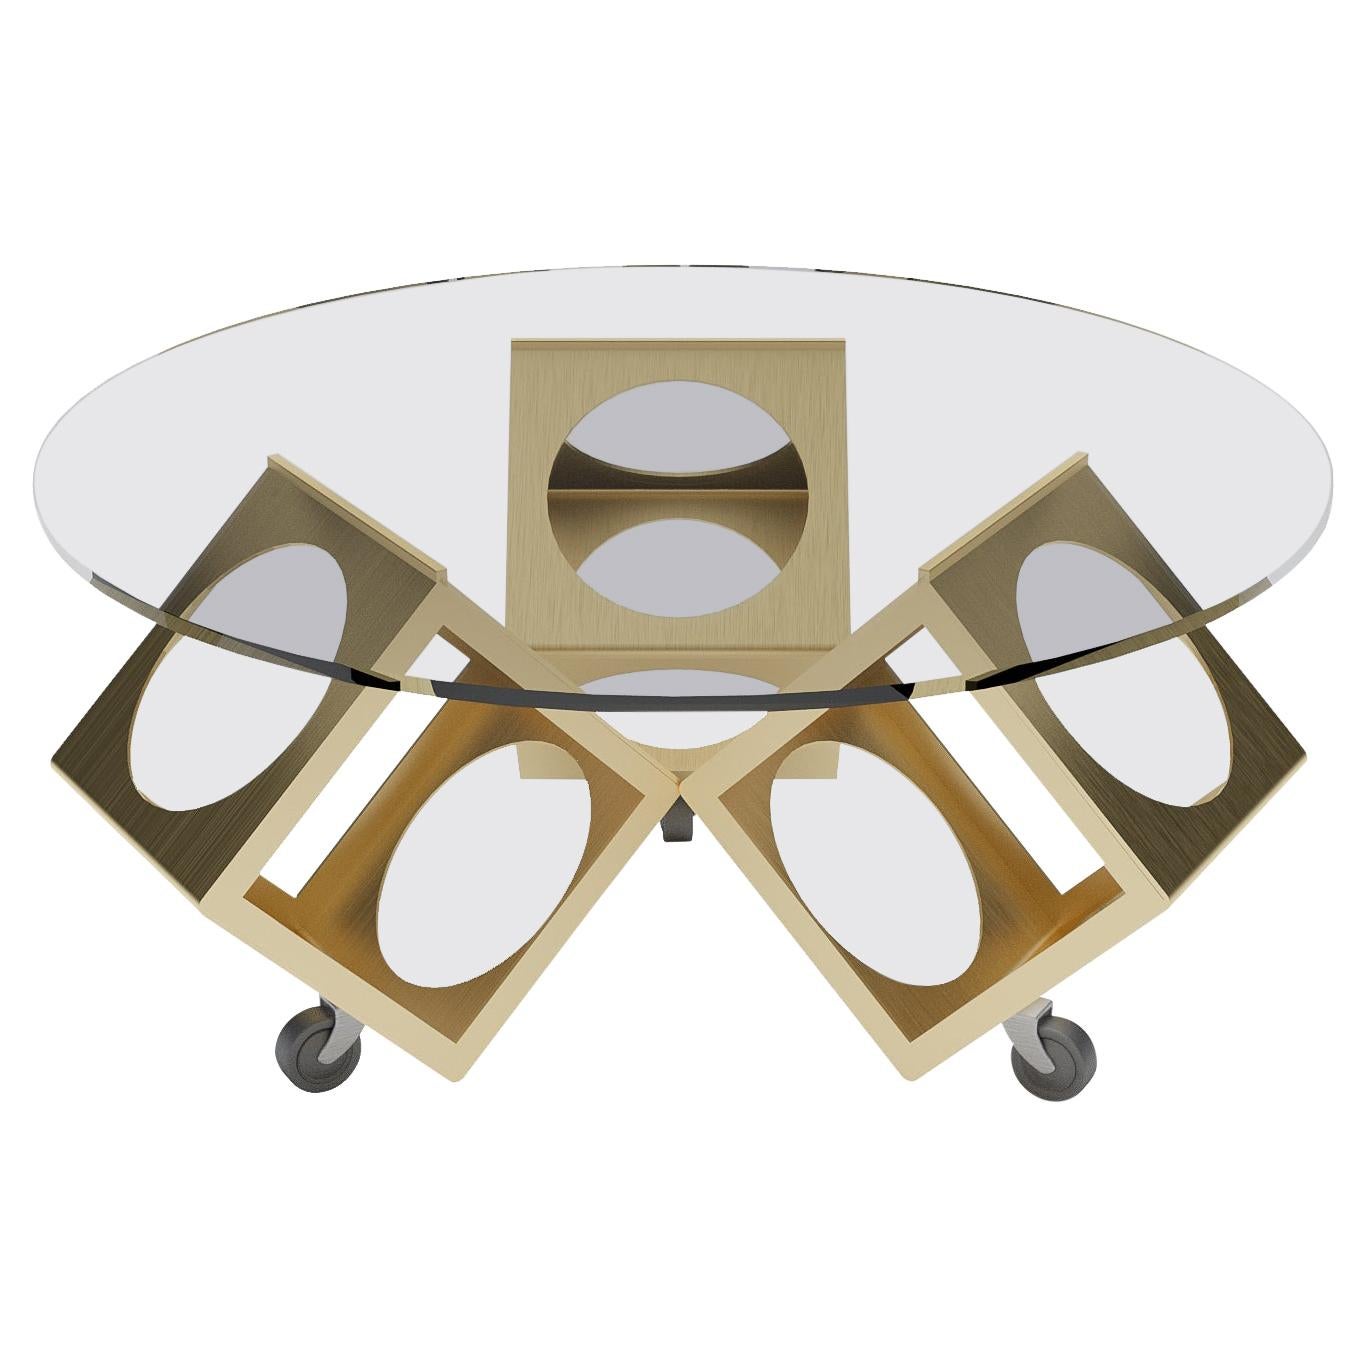 Round Box Table on Castors, Designed by Laurie Beckerman